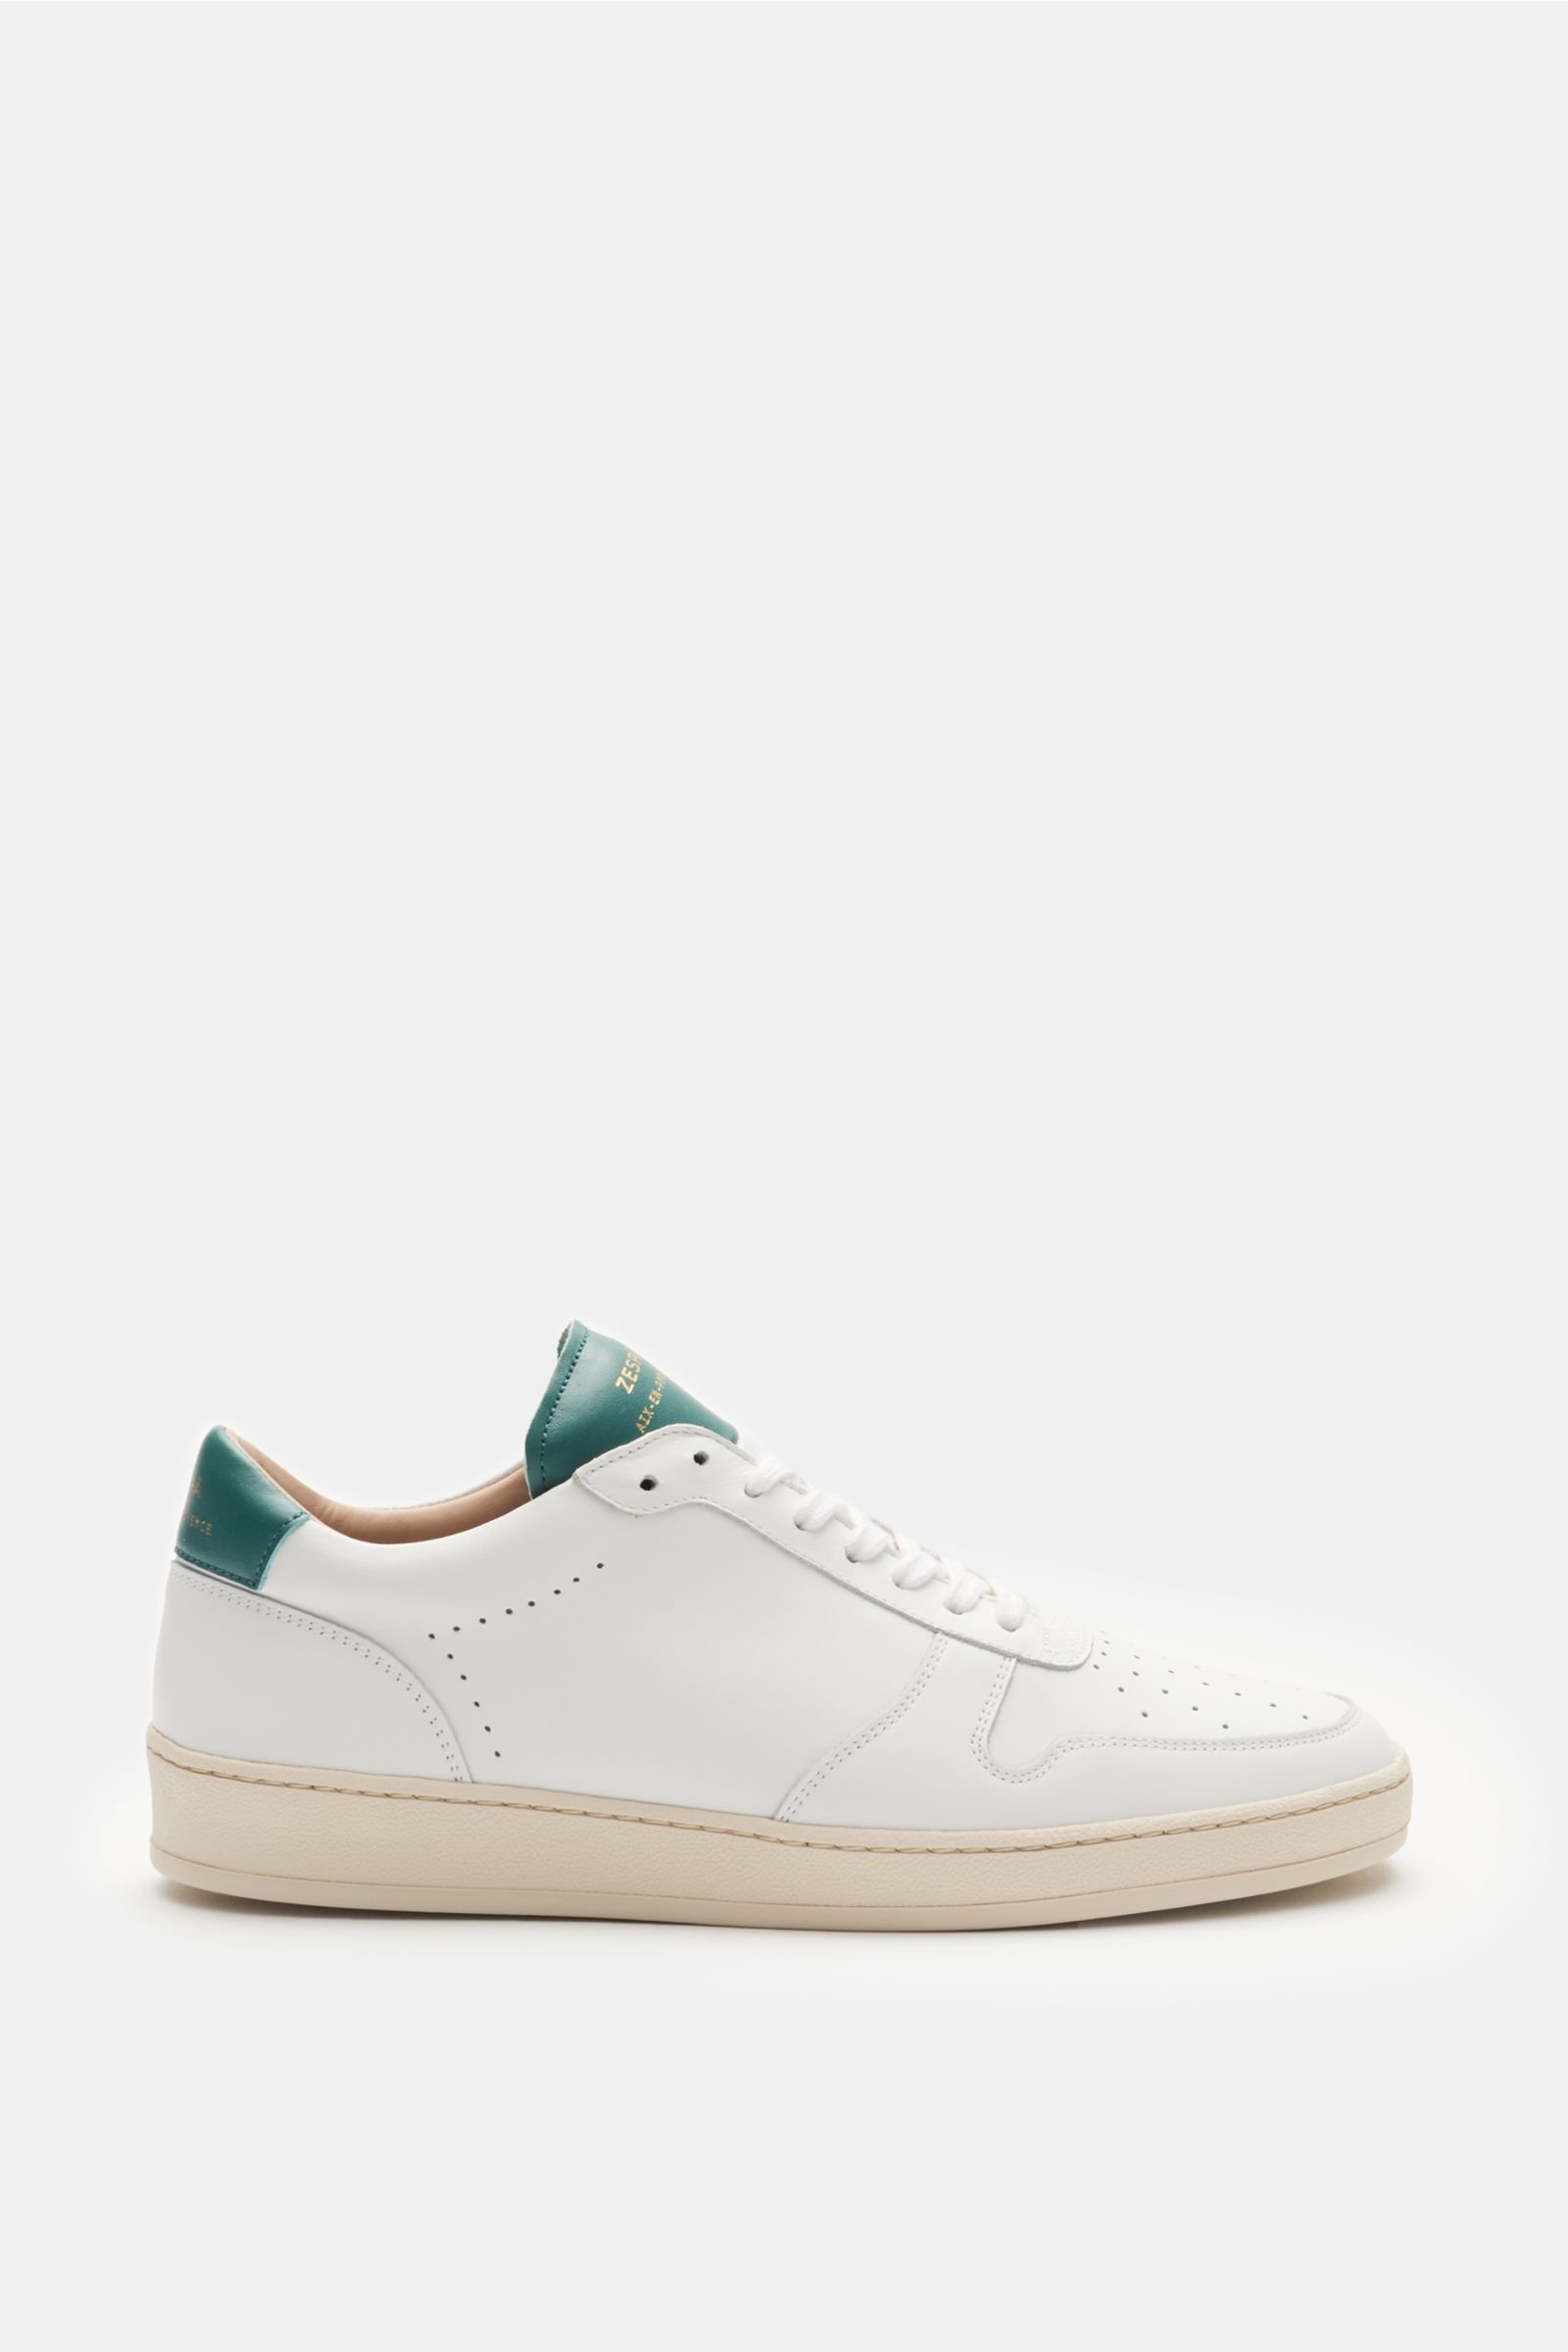 Sneakers 'ZSP23 APLA' white/teal